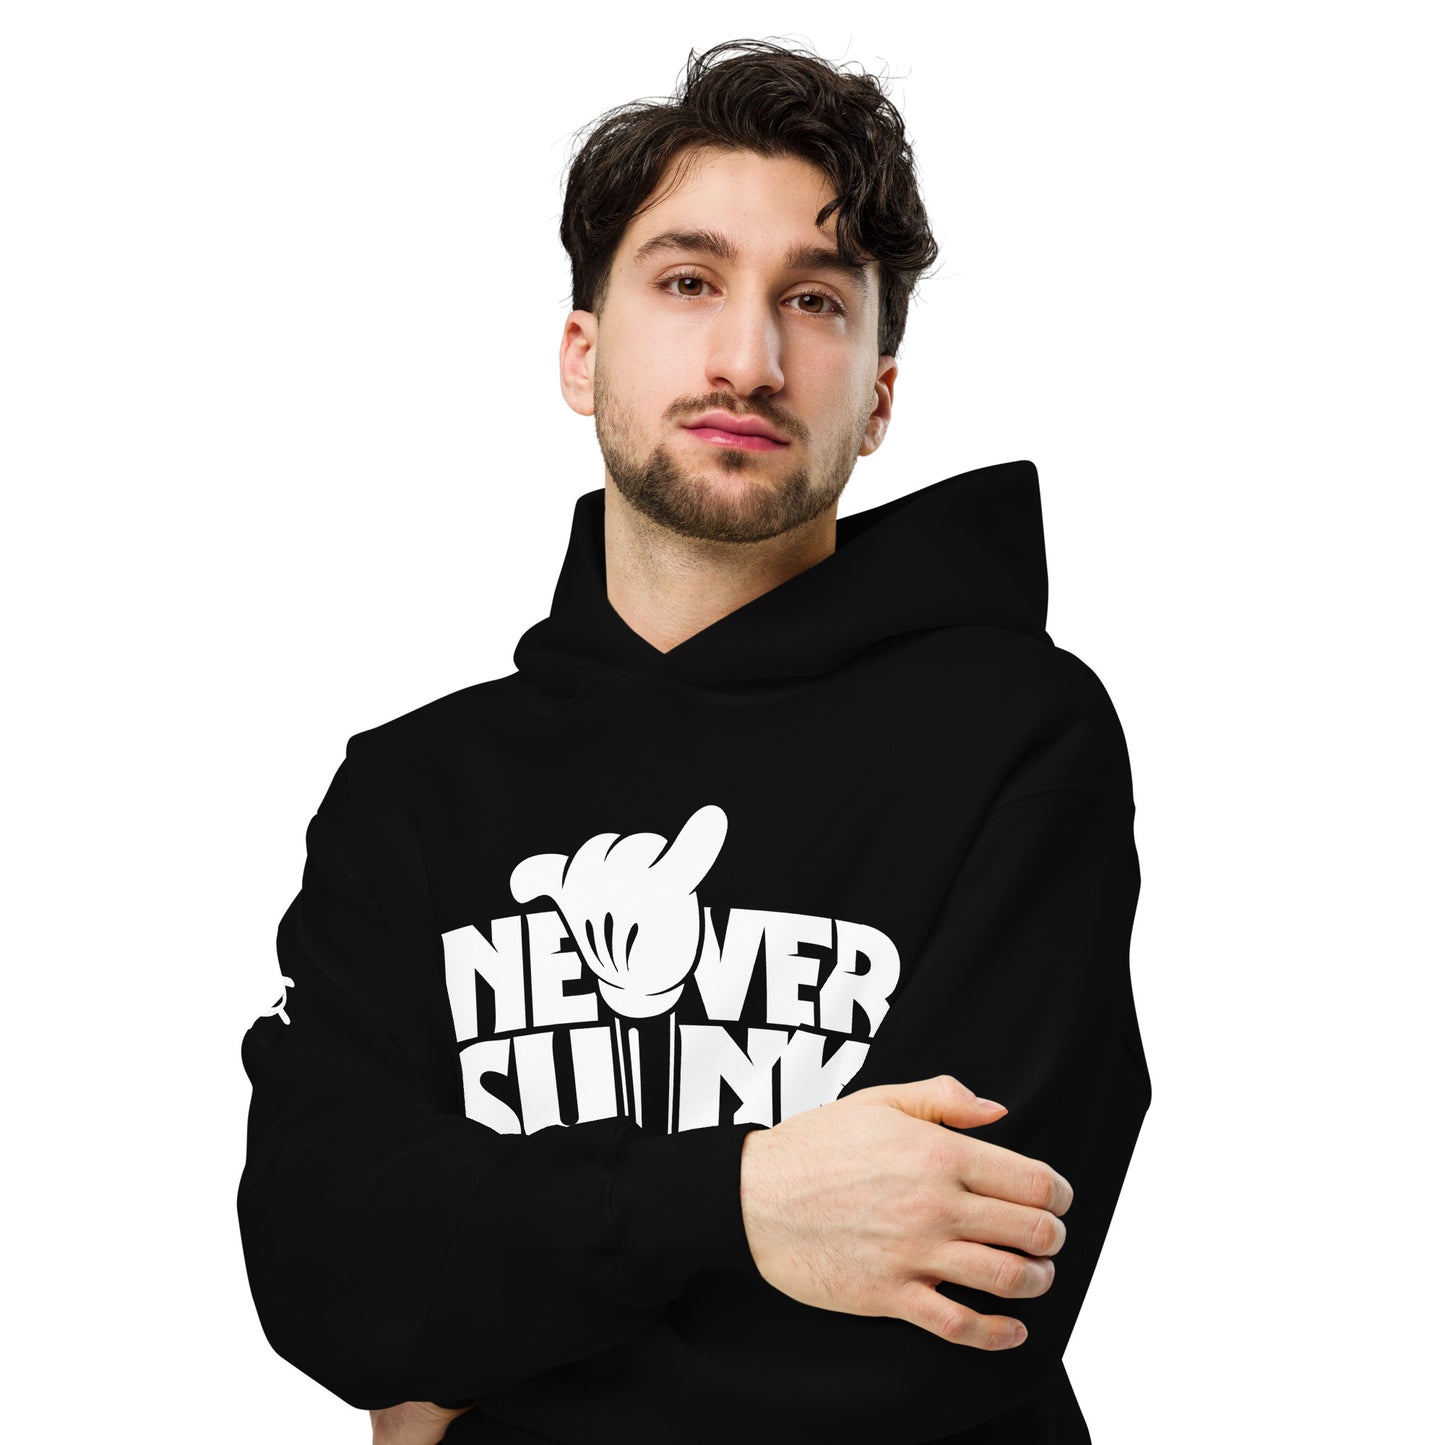 Never Sunk Oversized Pullover Hoodie